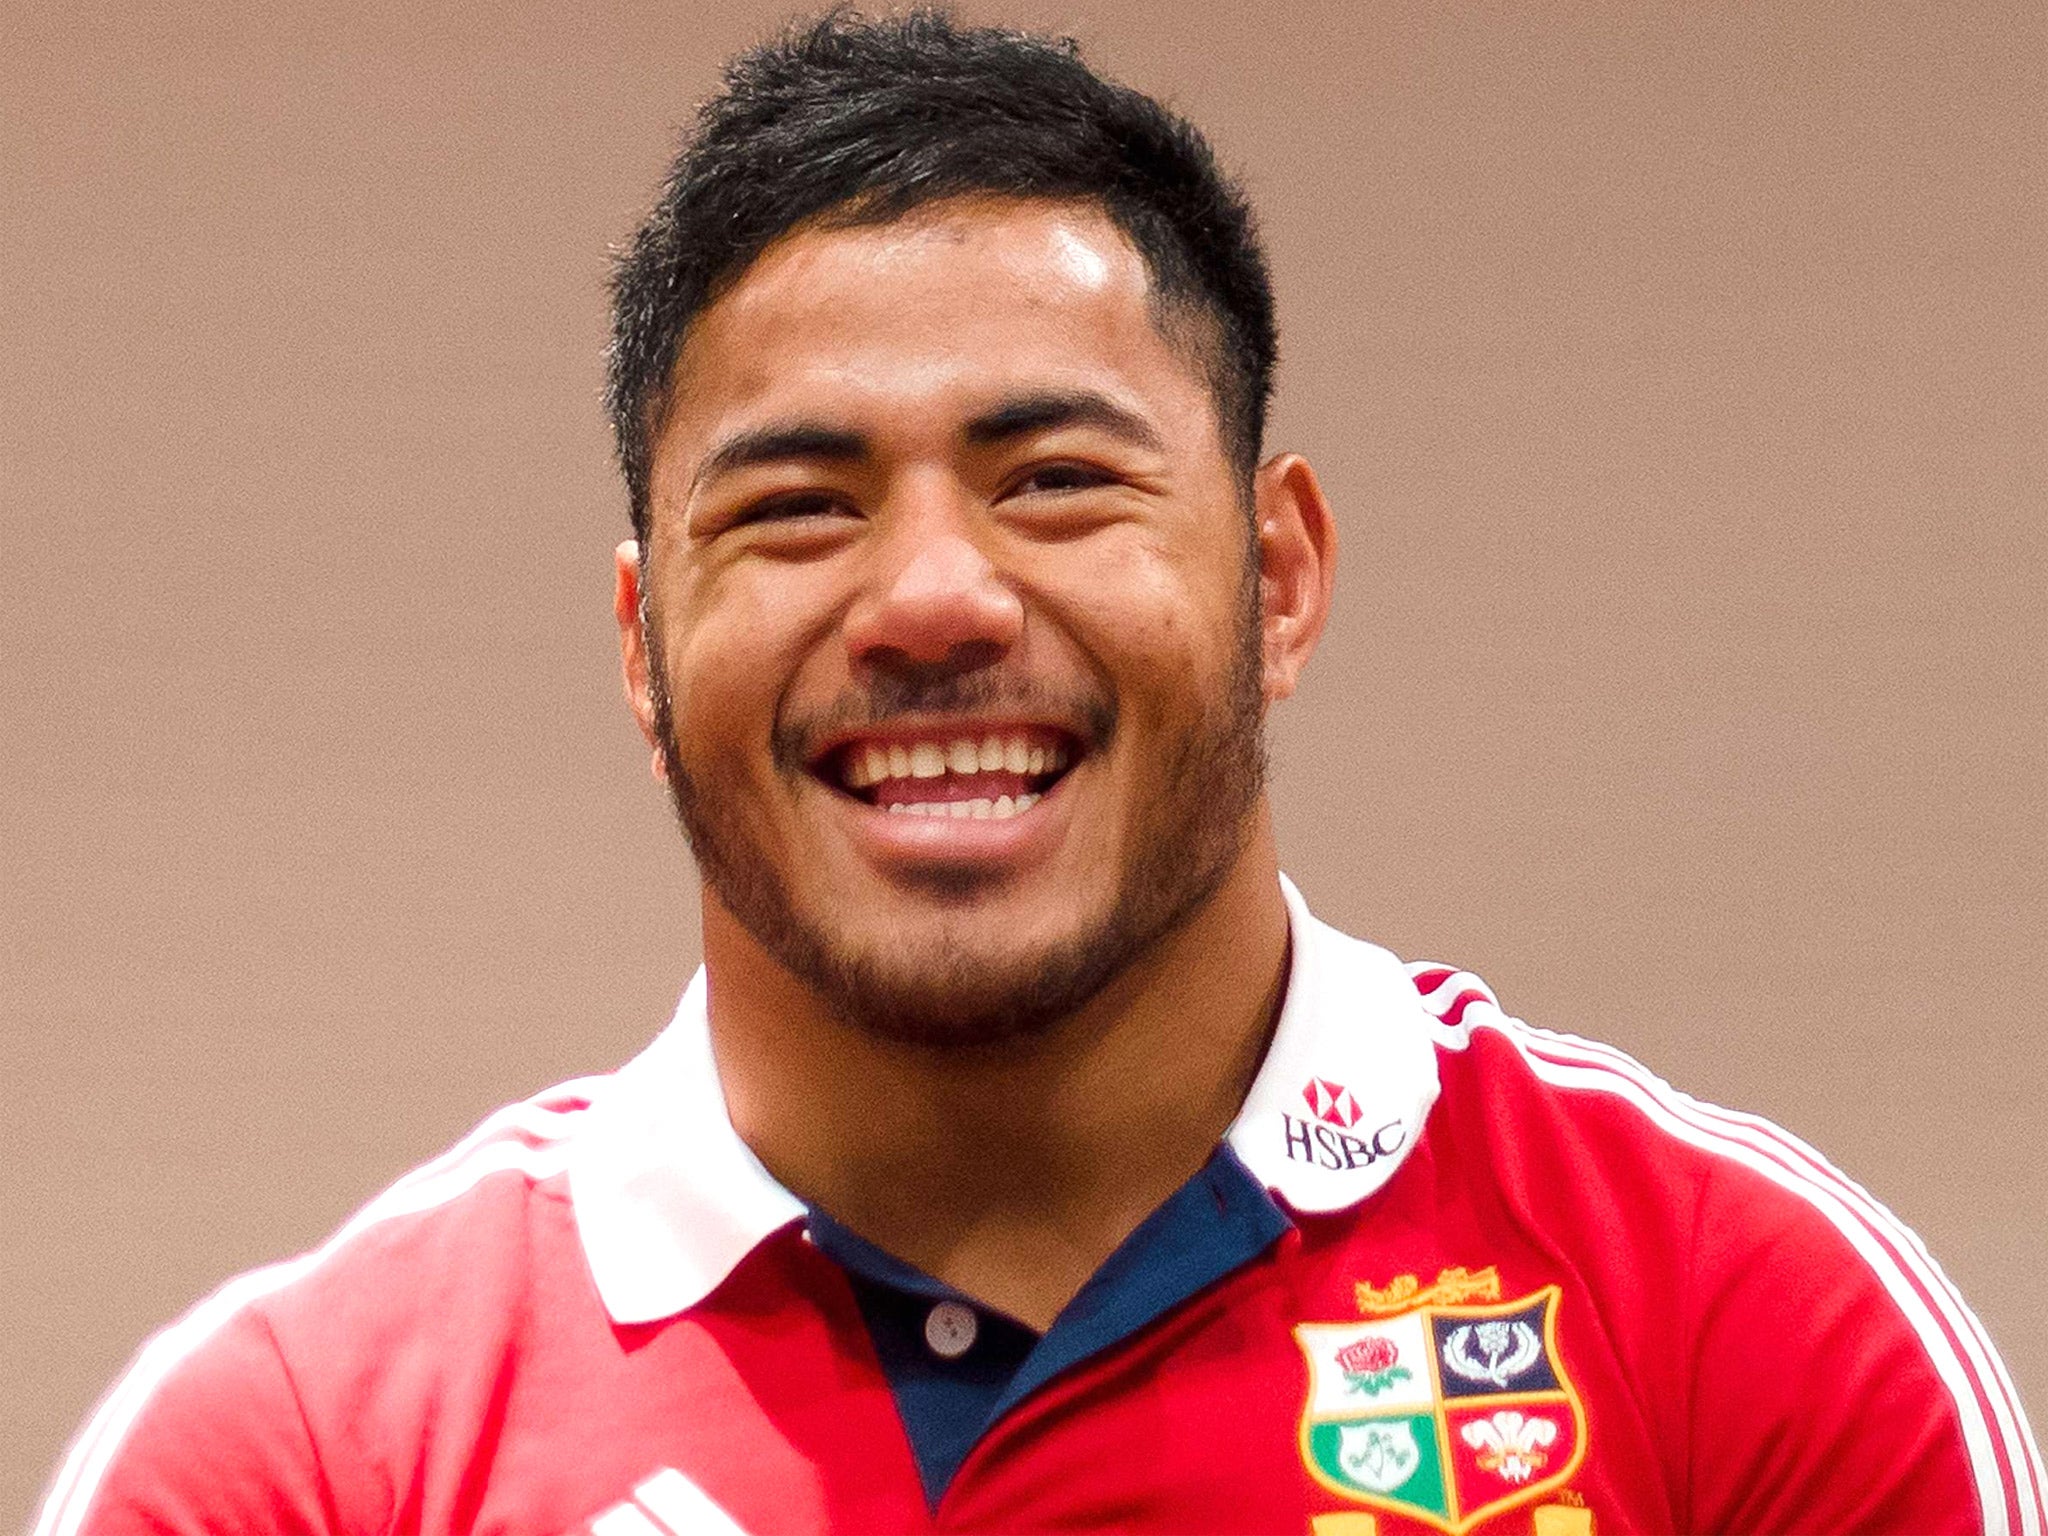 Manu Tuilagi is very excited to be on his first Lions tour